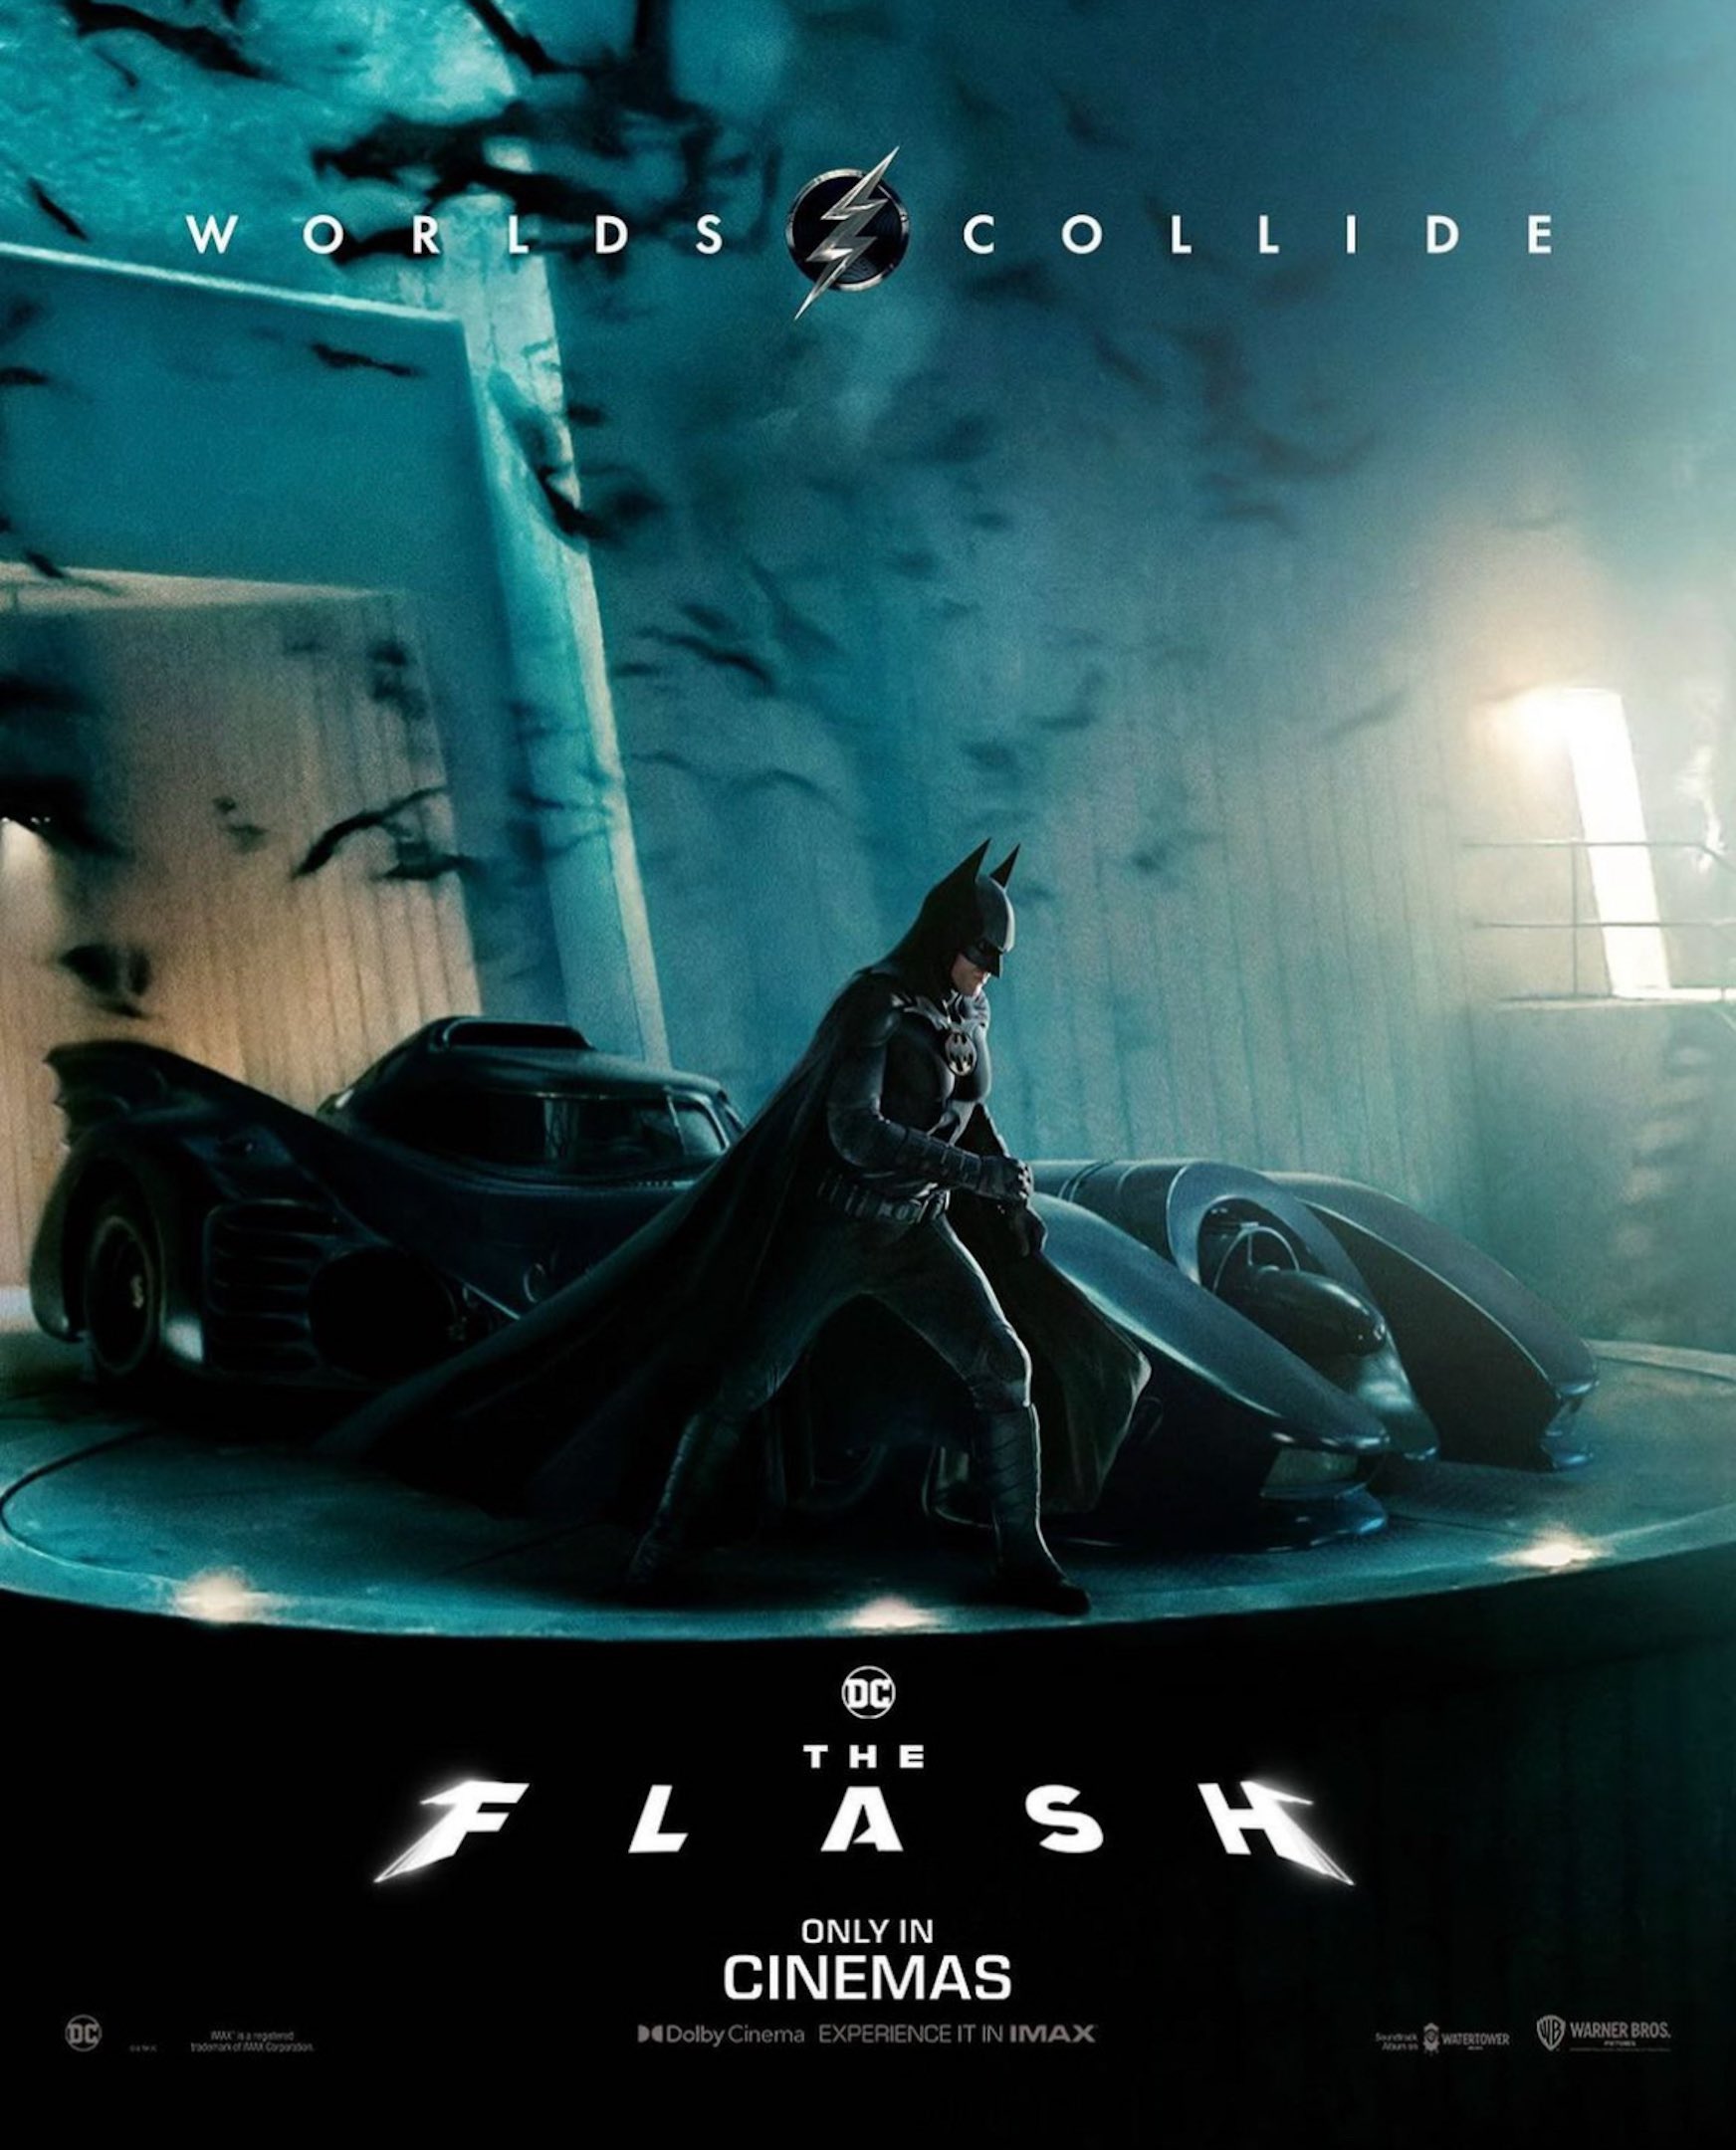 The Flash Jeremy Irons Trailer & Poster 3